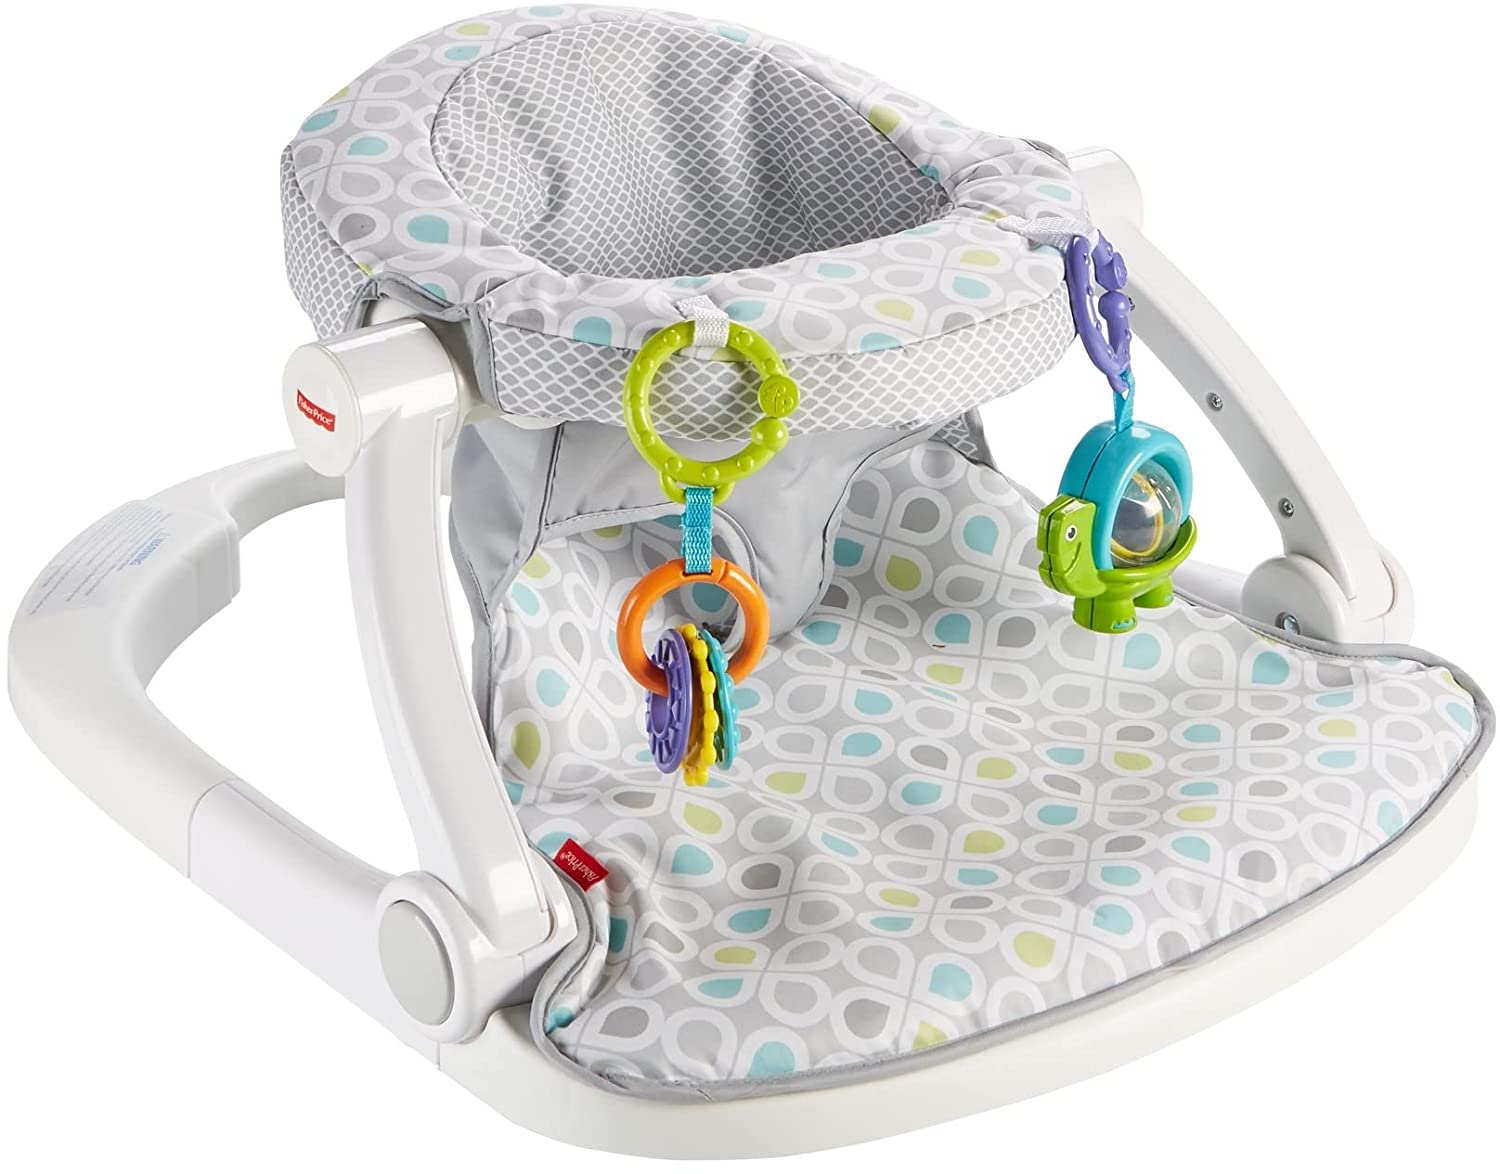 Fisher-Price Portable Baby Seat with-Toys, Baby Chair for Sitting Up, Sit-Me-Up Floor Seat, Honeydew Drop
